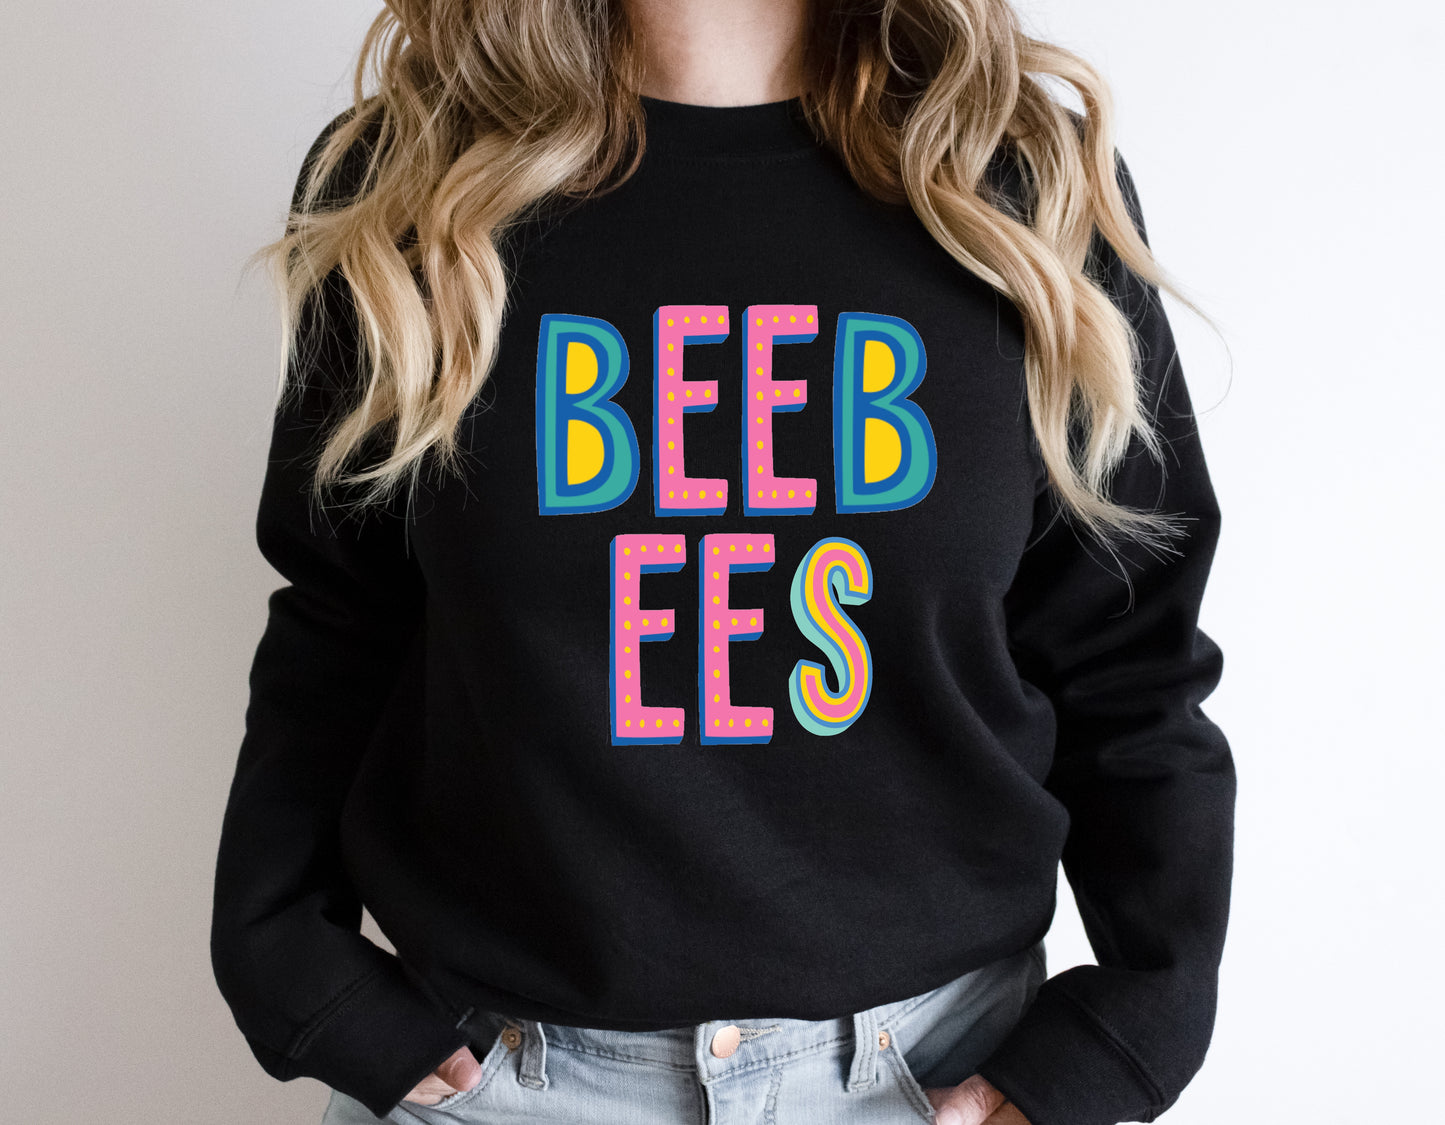 BeeBees Colorful Graphic Tee